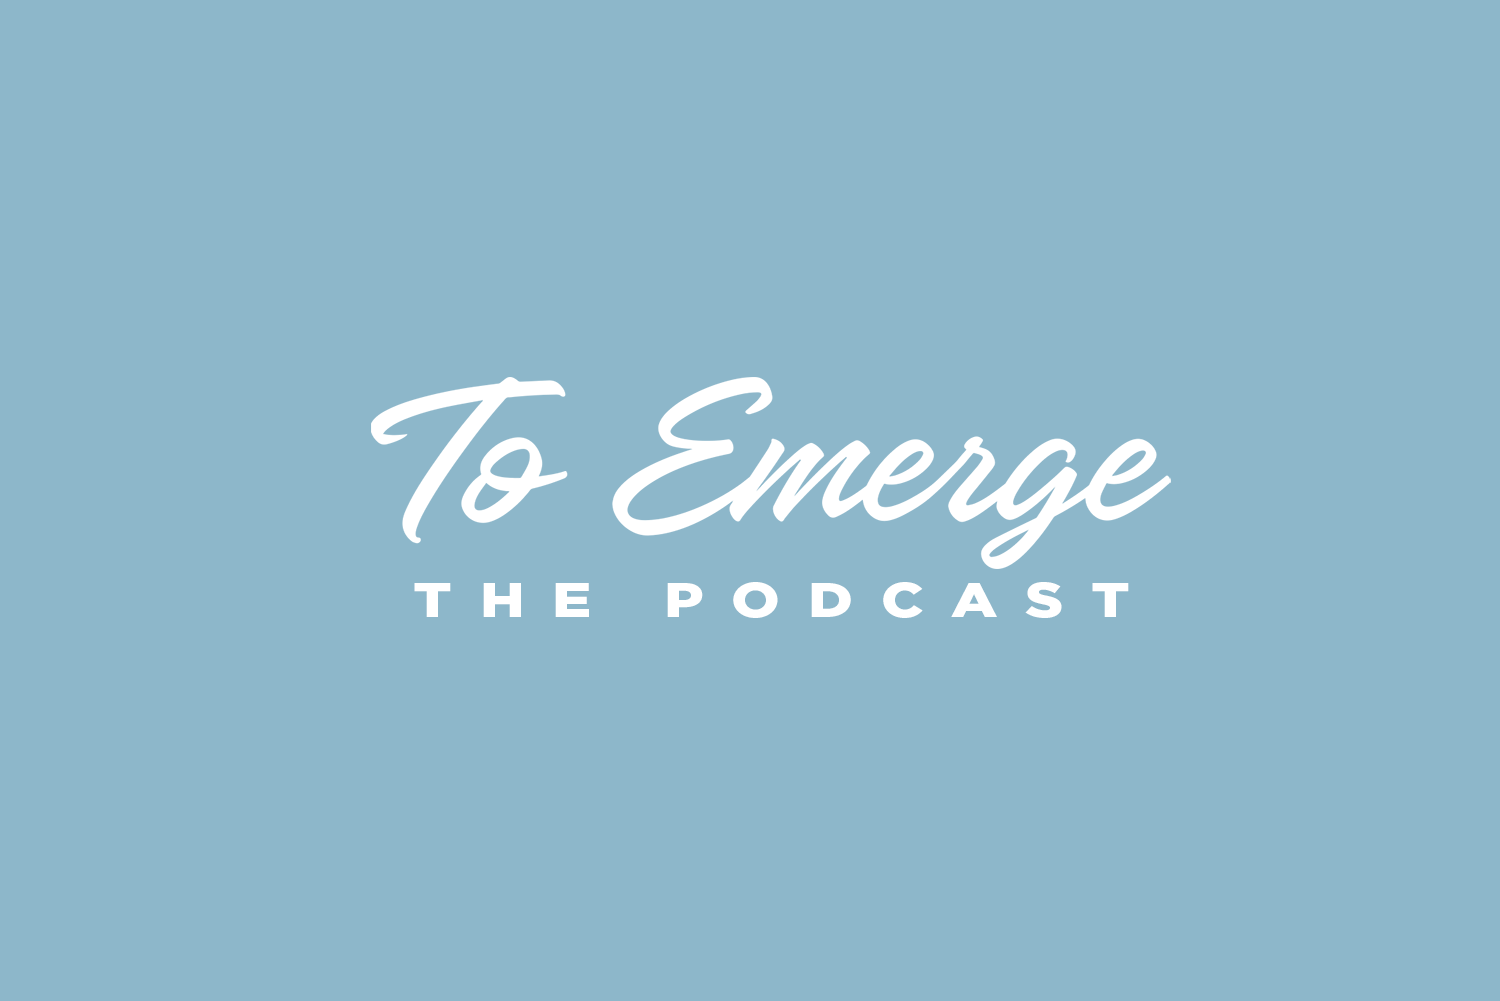 To Emerge The Podcast